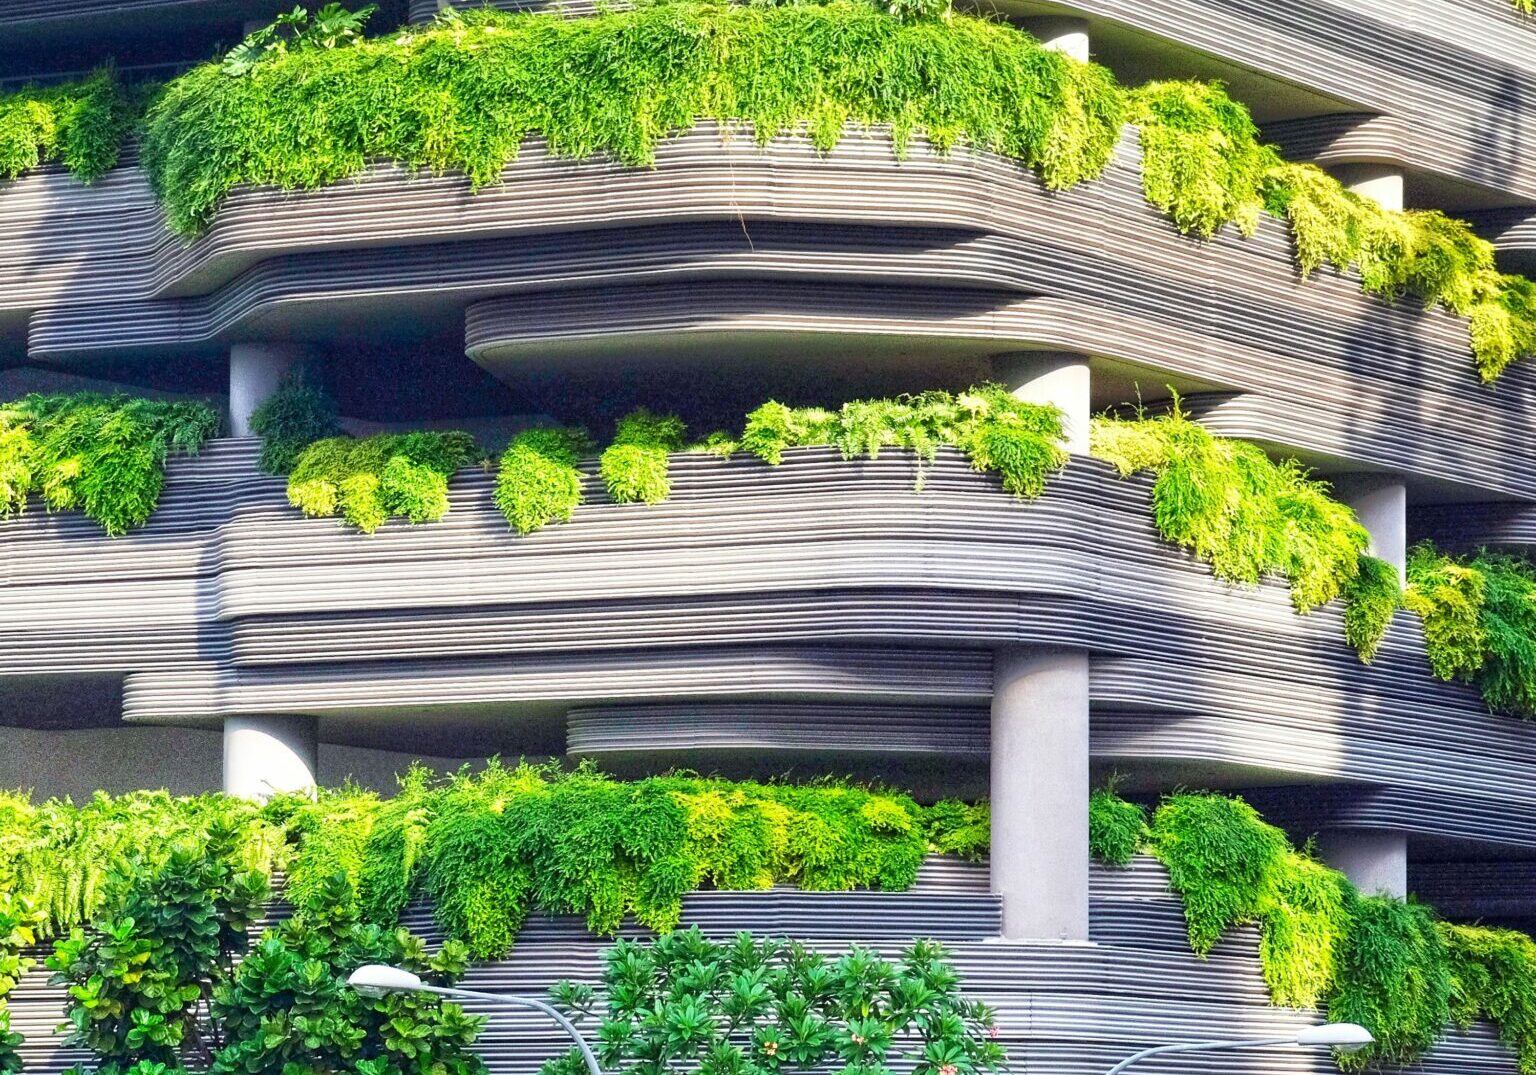 A multistorey building covered in green plants